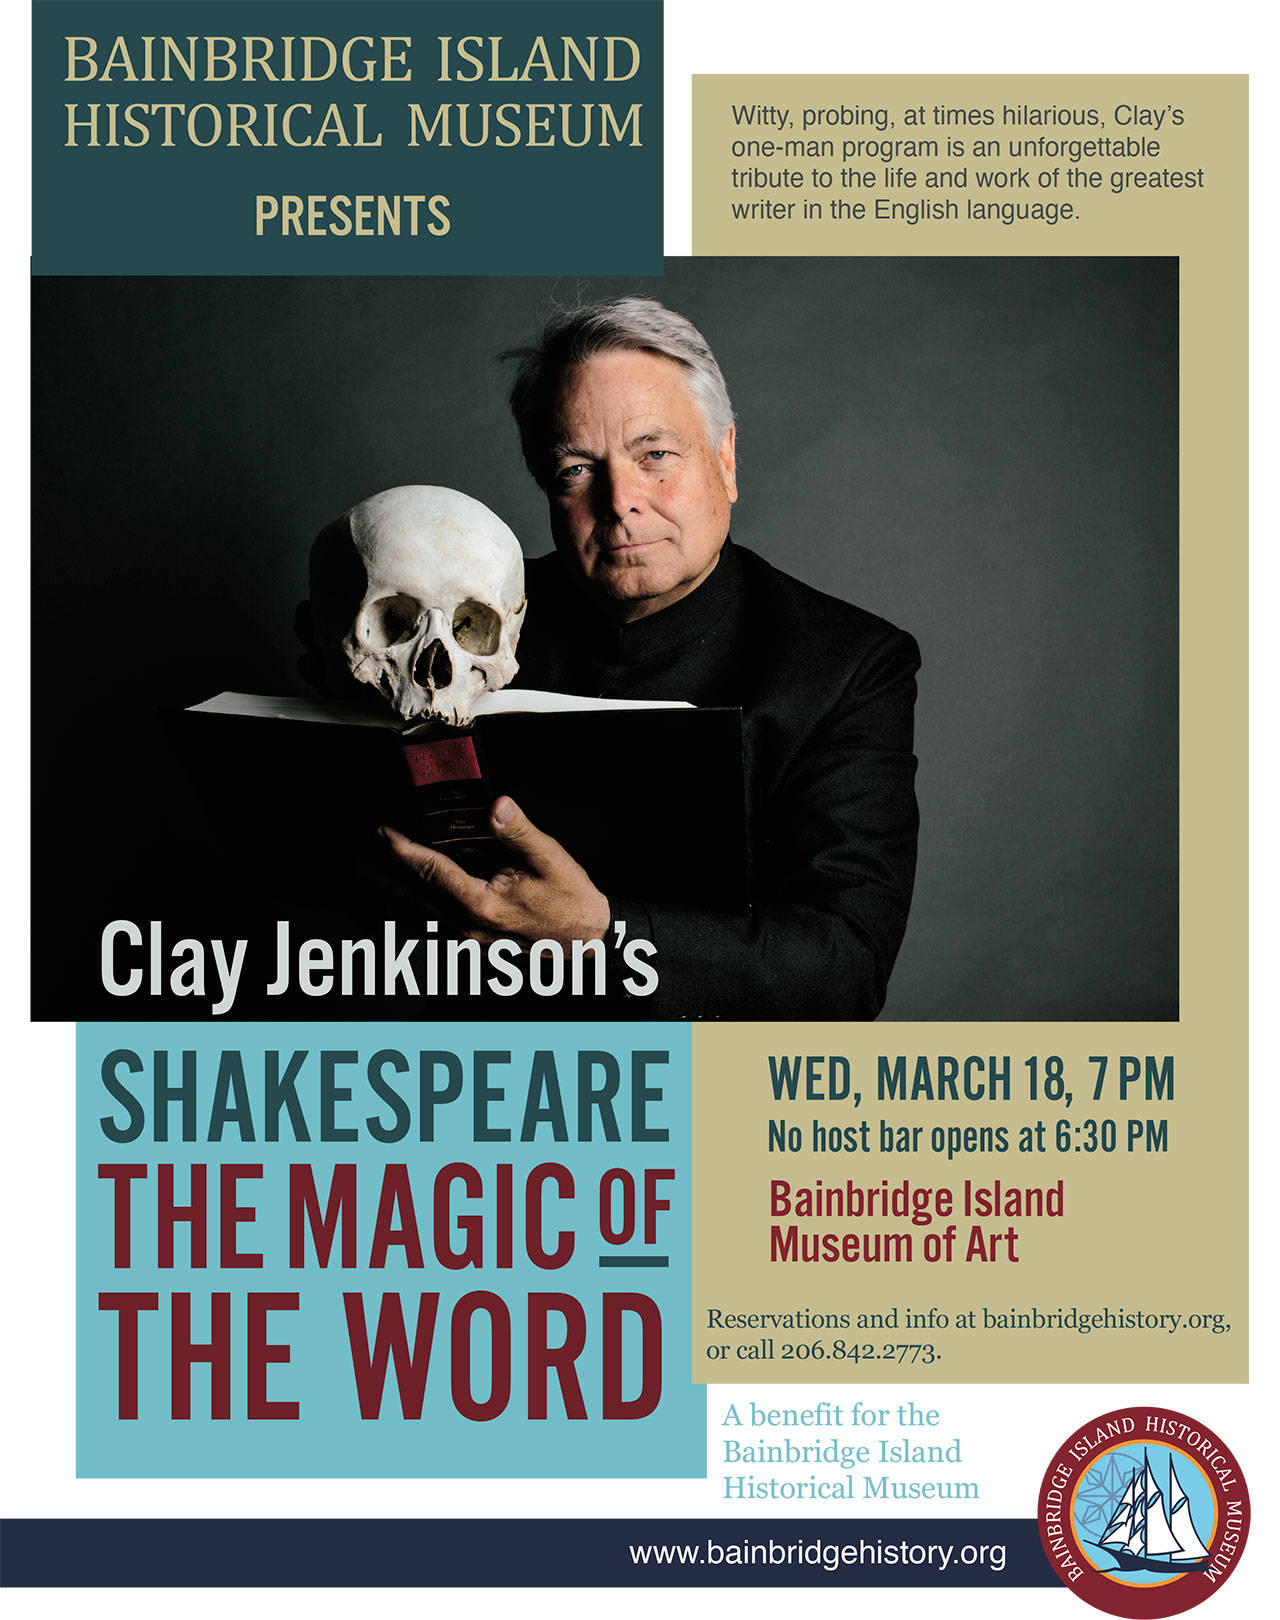 Image courtesy of Brianna Kosowitz | The Bainbridge Island Historical Museum is holding its first fundraiser of the year, Clay Jenkinson’s “Shakespeare: The Magic of the Word,” at 7 p.m. Wednesday, March 18.